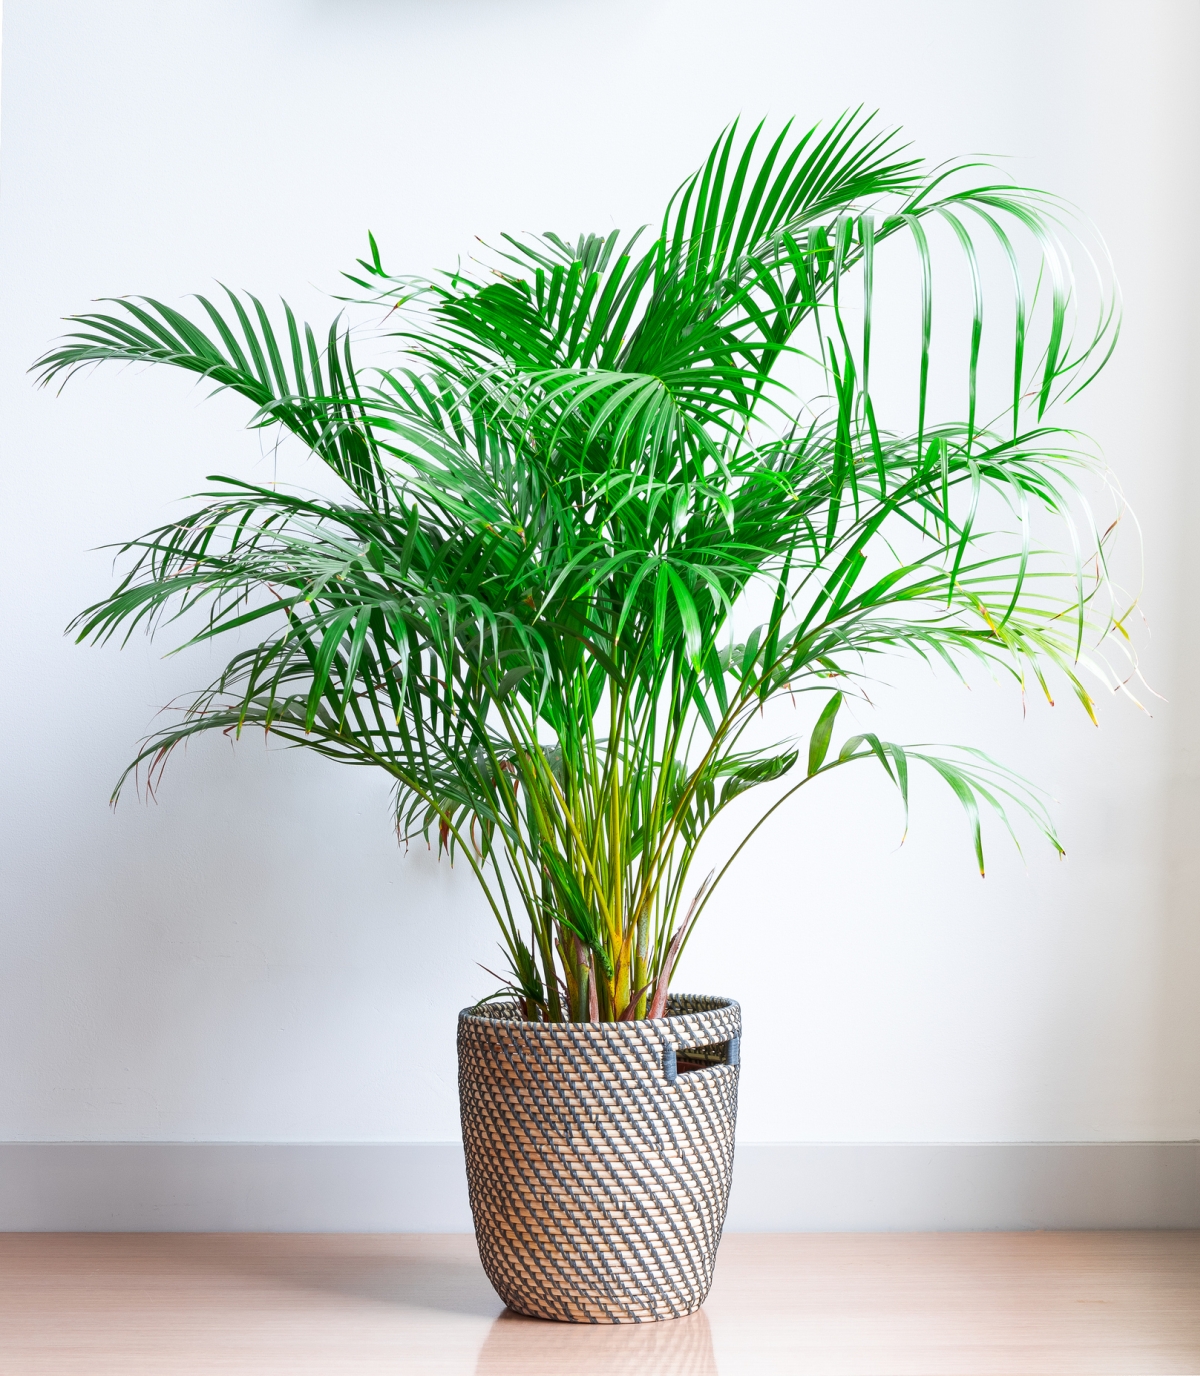 How to Grow and Care for the Majestic Areca Palm